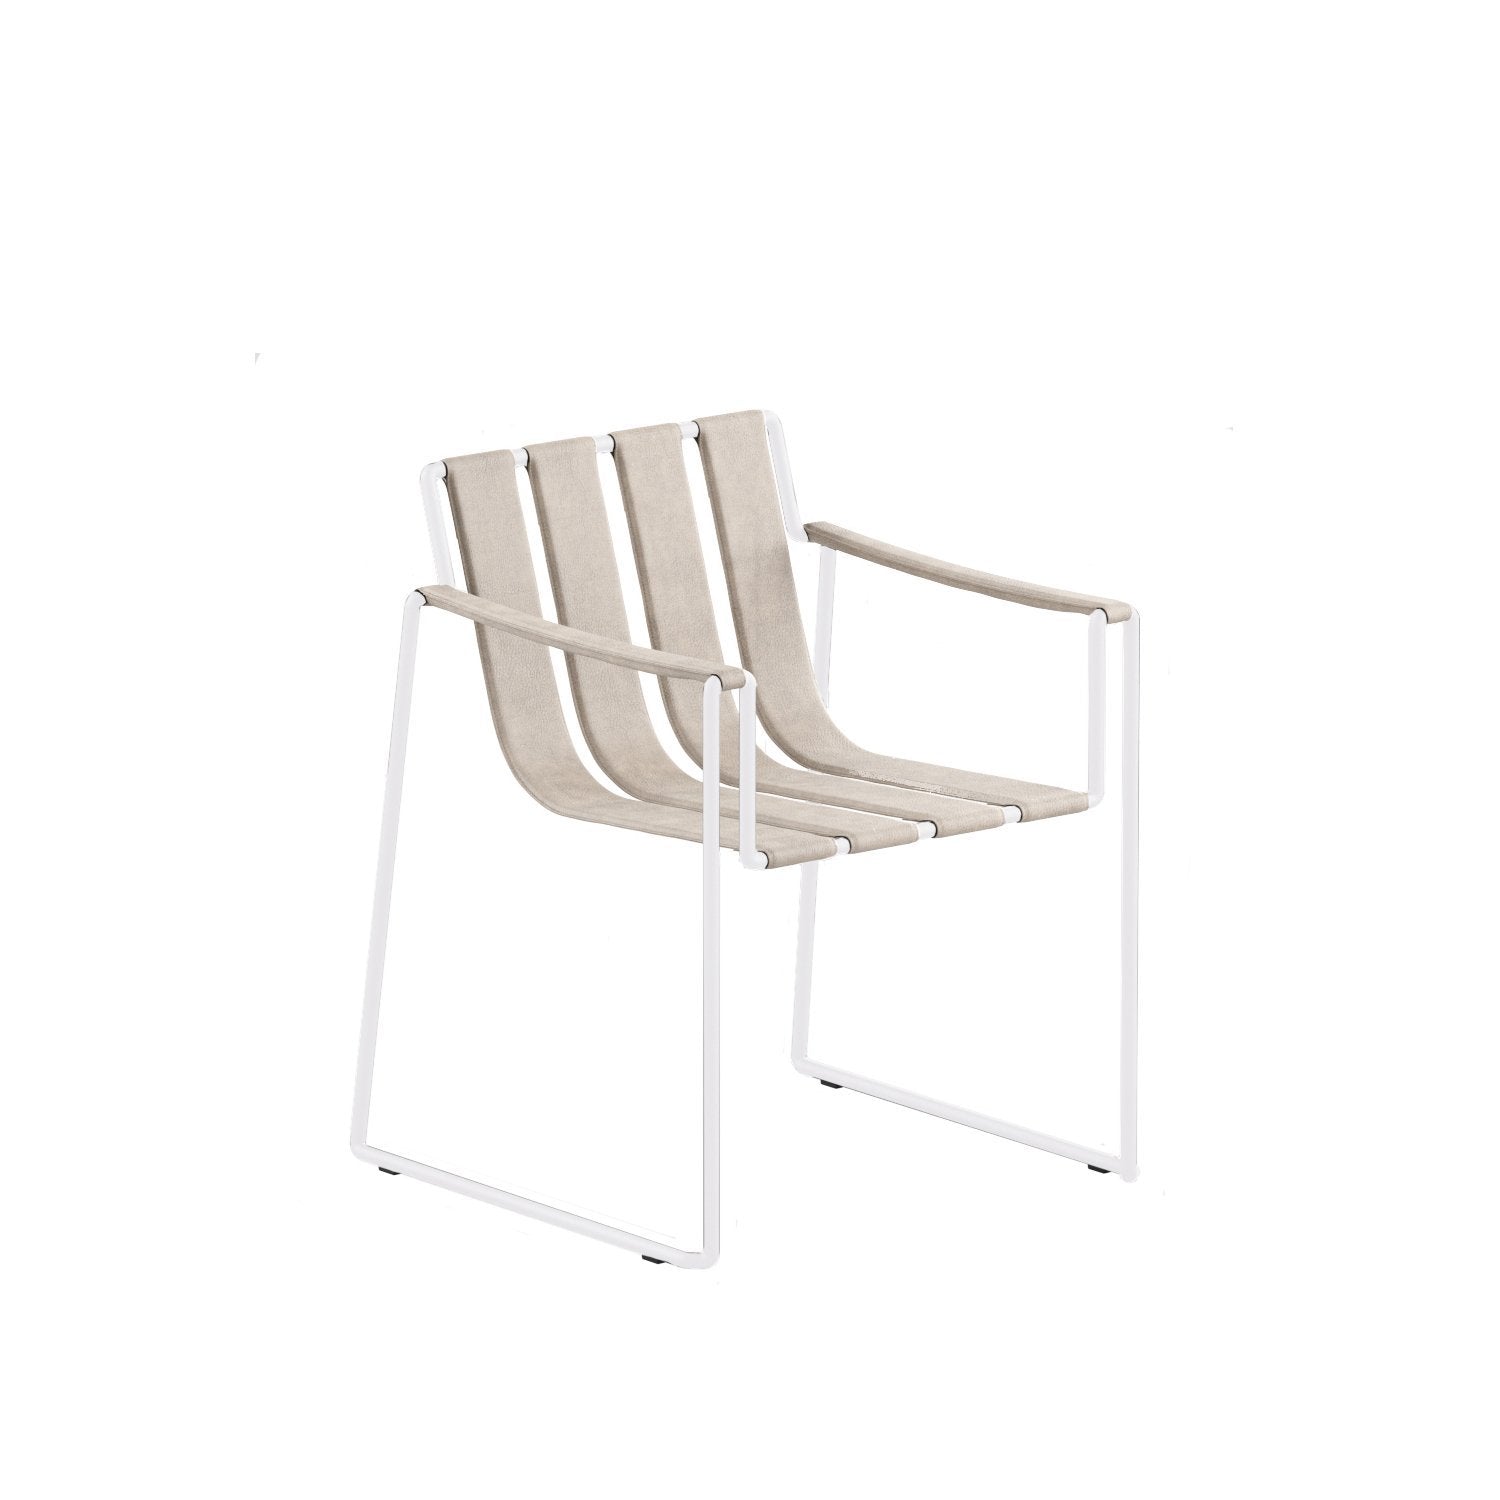 Strappy 55 chair with white frame